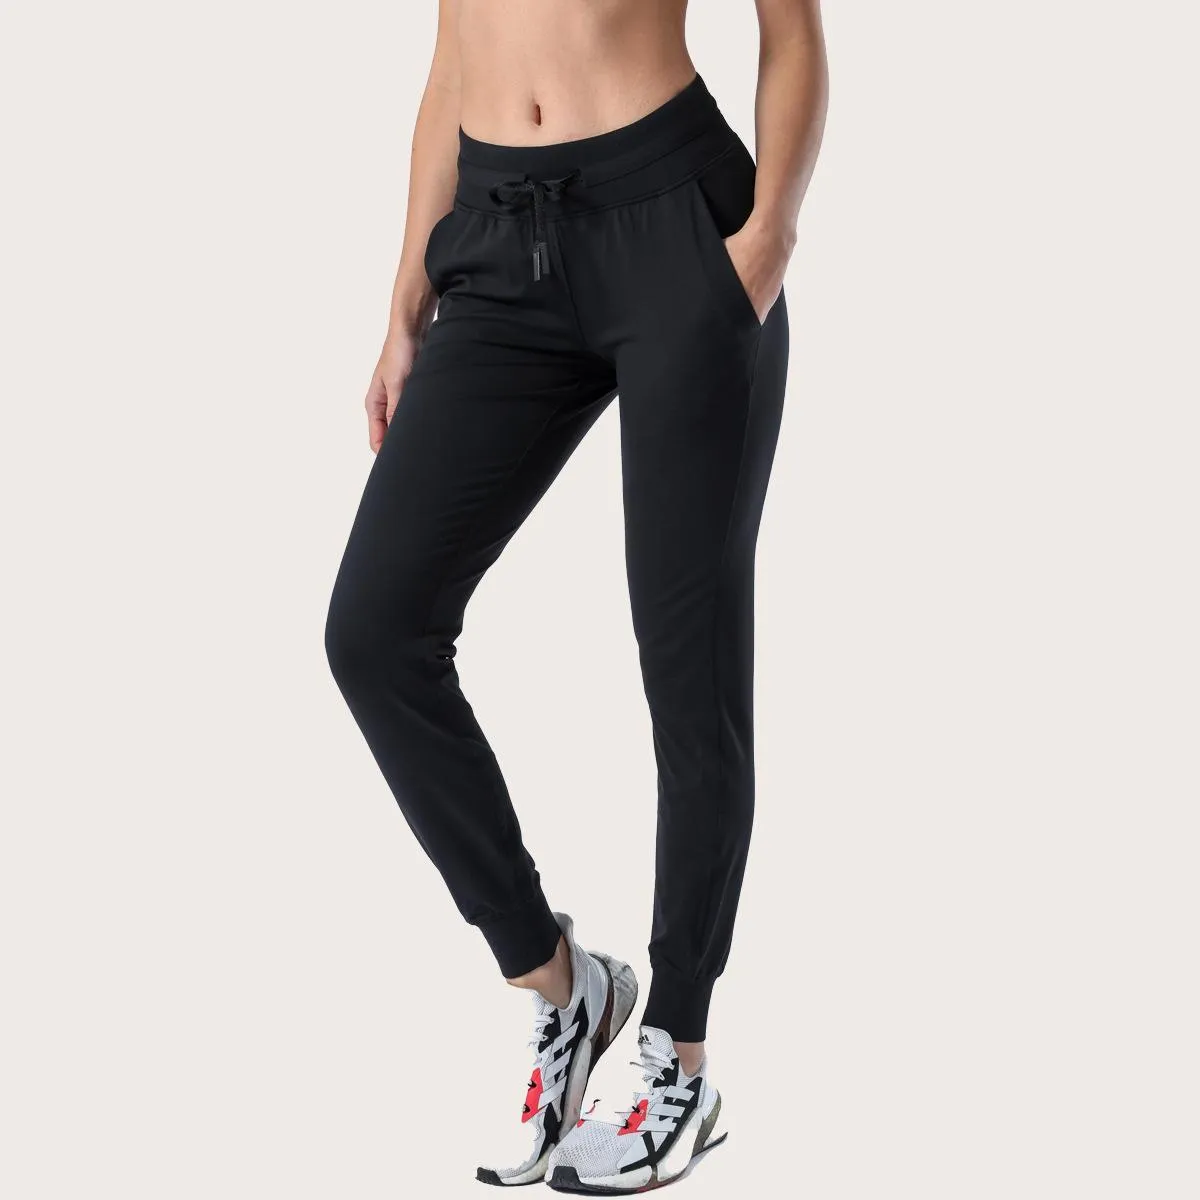 Naked Feel Womens Drawstring Joggers With Two Sided Pocket For Female  Fitness, Running, And Sweat From Yang137, $19.38